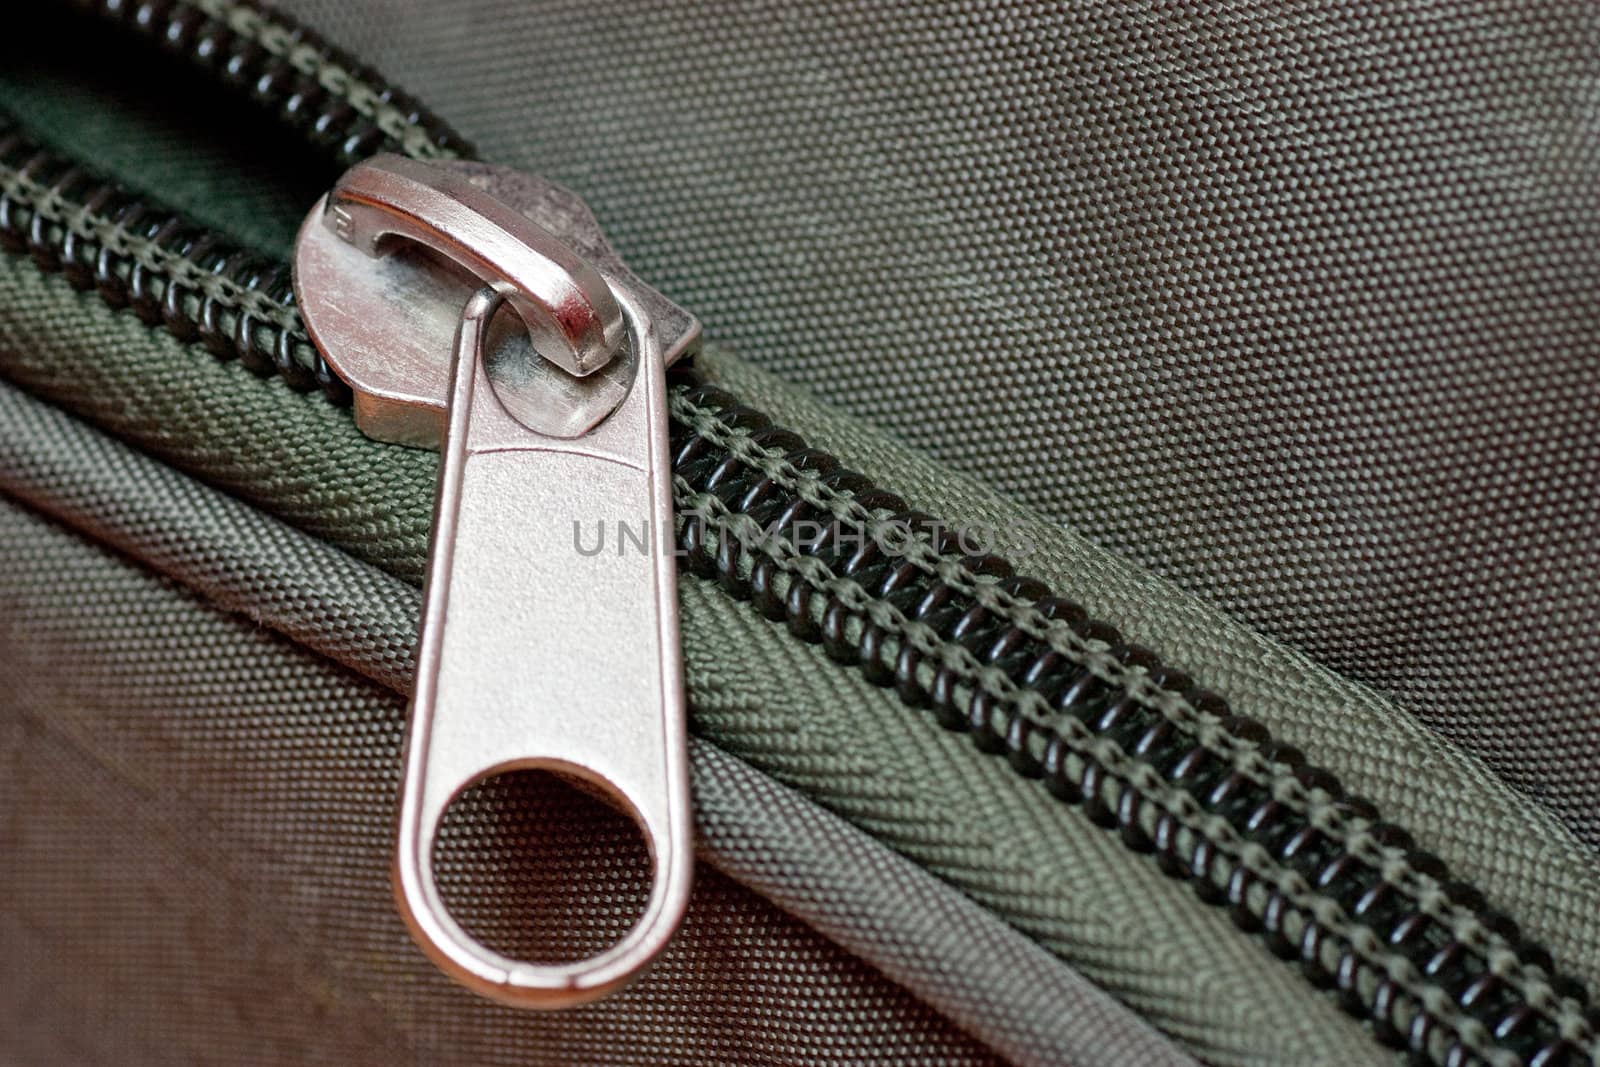 Close-up of a half-opened zipper on a green bag.